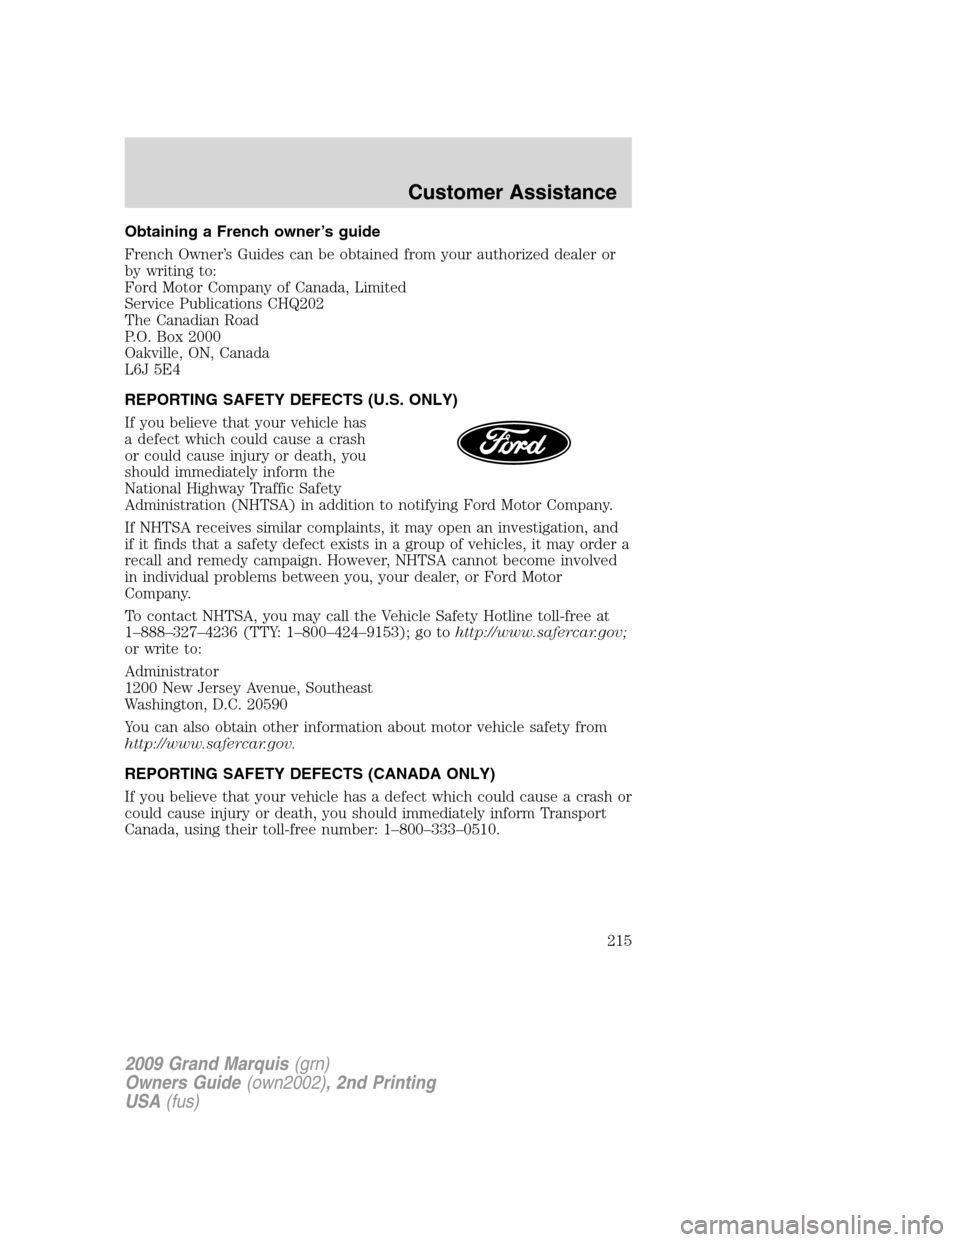 Mercury Grand Marquis 2009  Owners Manuals Obtaining a French owner’s guide
French Owner’s Guides can be obtained from your authorized dealer or
by writing to:
Ford Motor Company of Canada, Limited
Service Publications CHQ202
The Canadian 